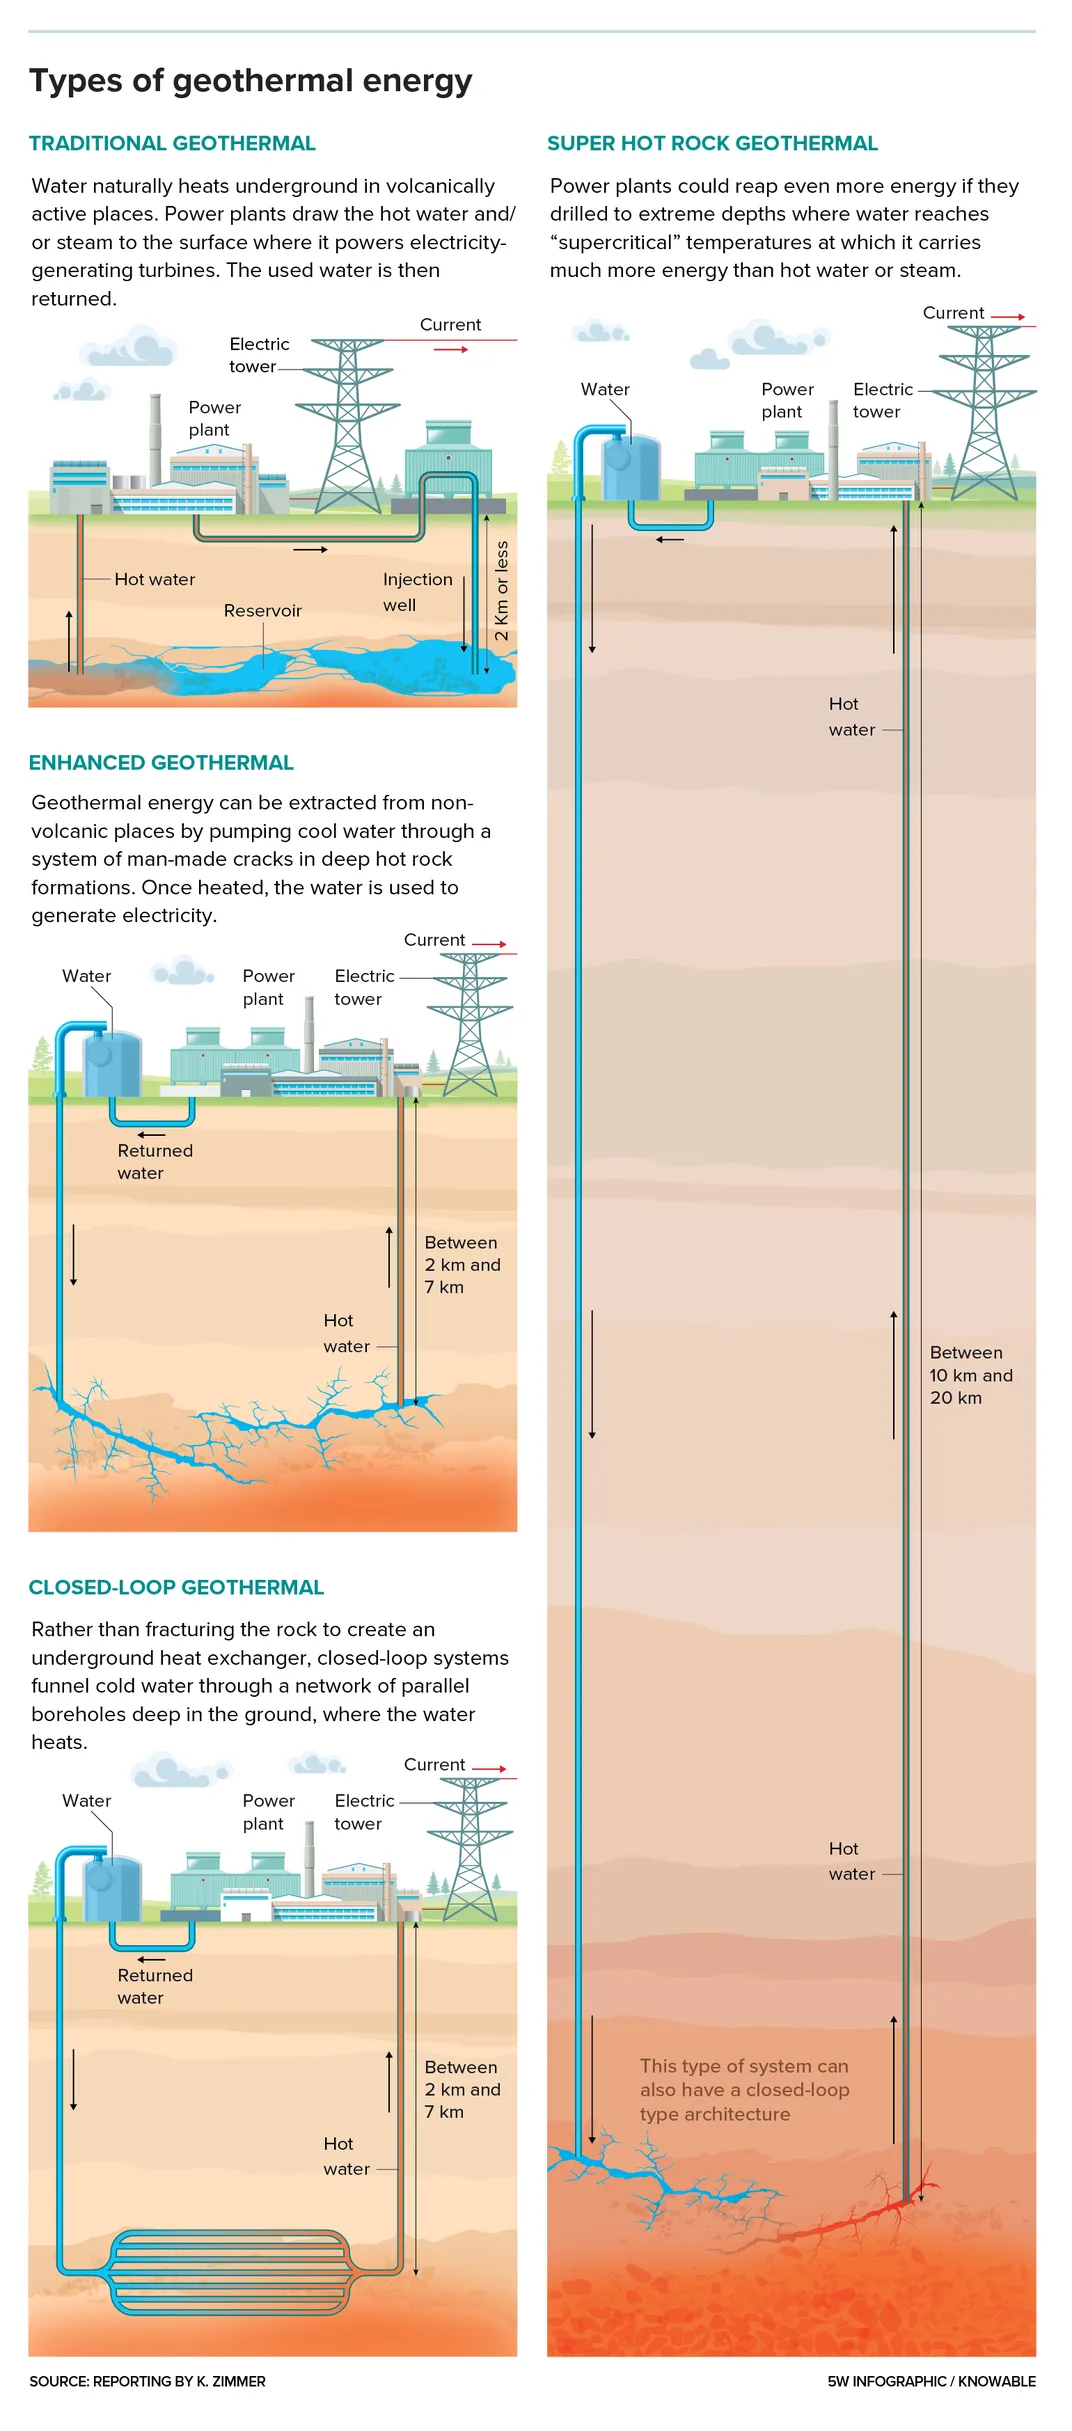 Is Geothermal Power Heating Up as an Energy Source?